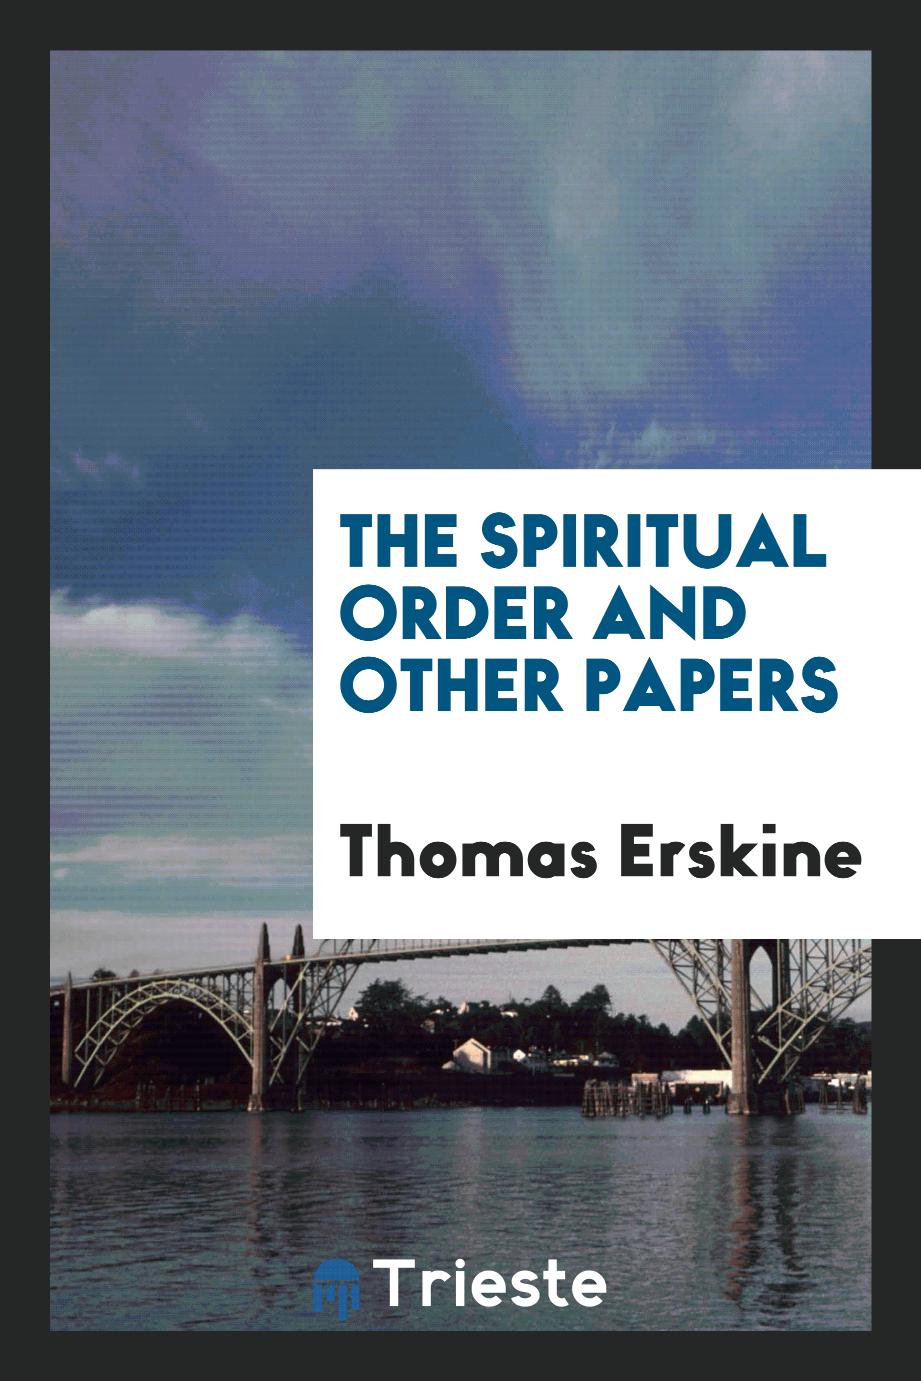 Thomas Erskine - The spiritual order and other papers